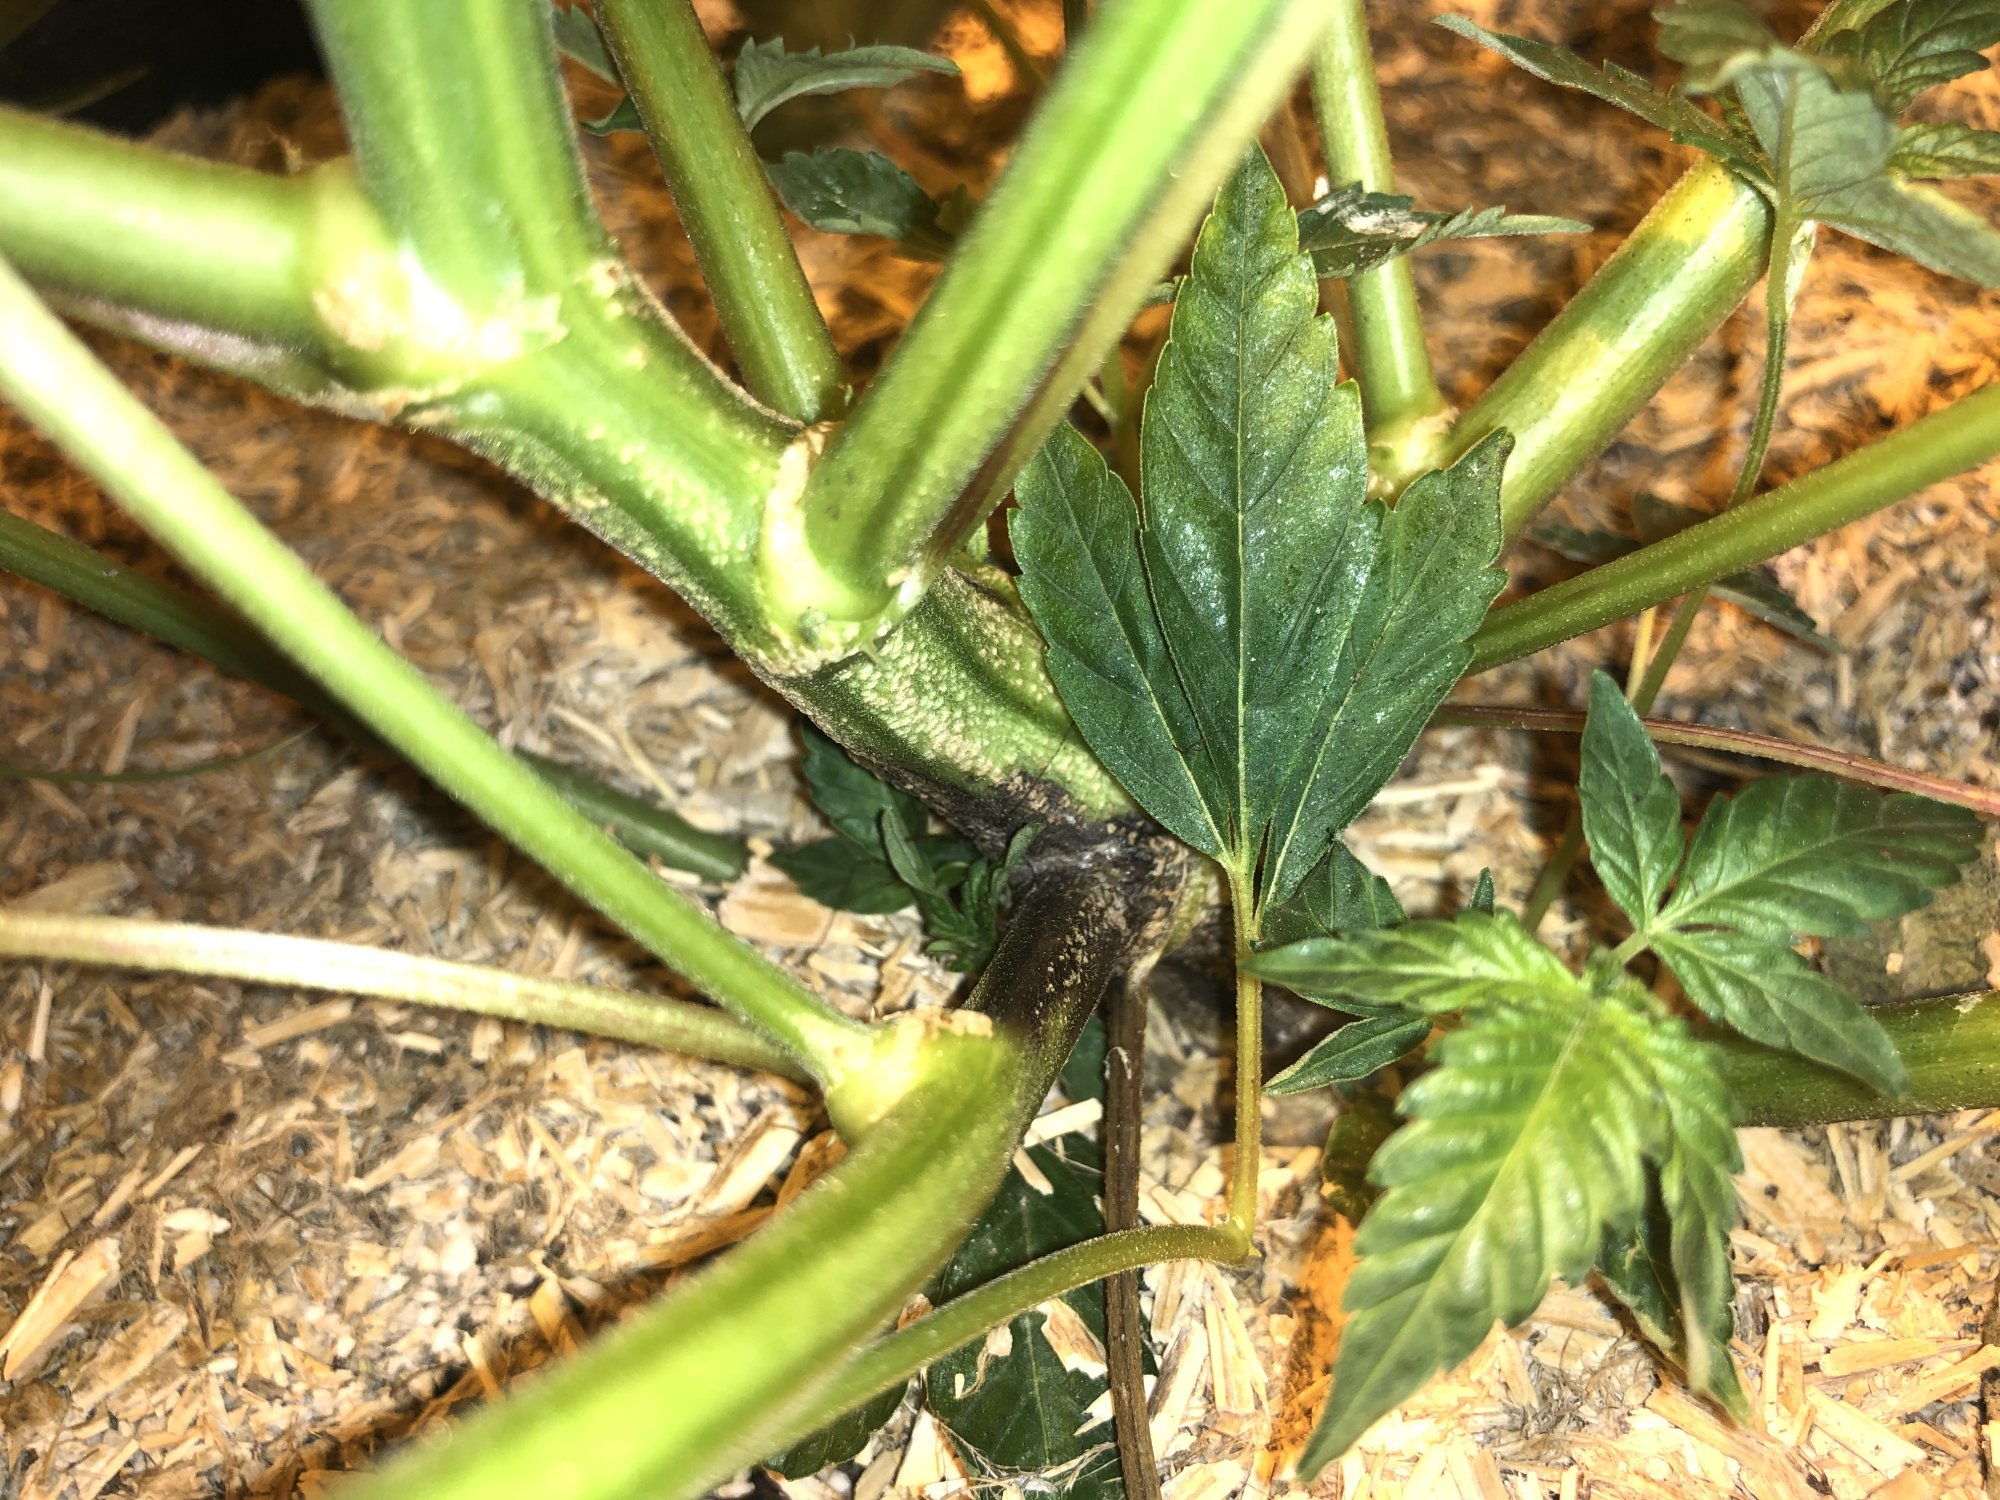 Stem rot or please help 4